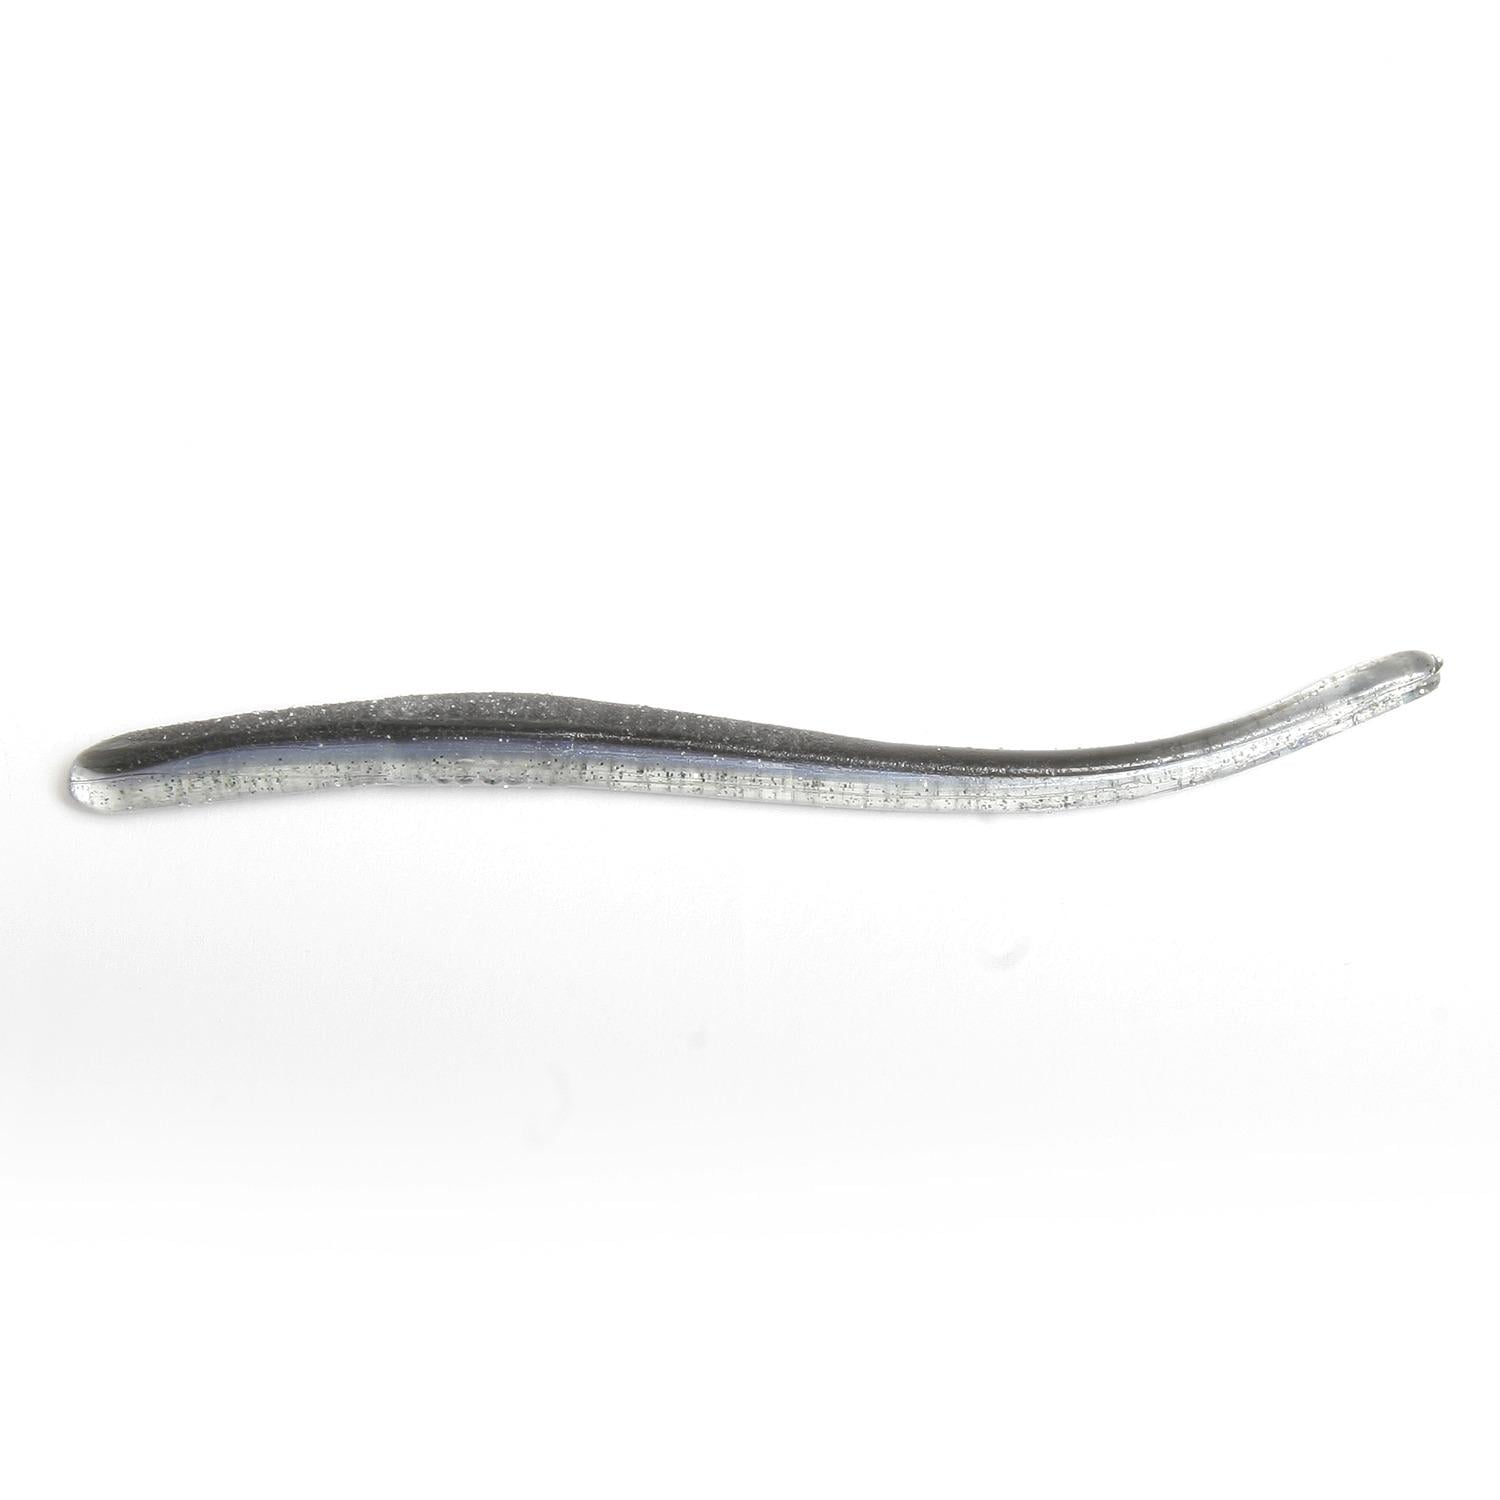 Roboworm ST-M61A Straight Tail Worm 4 .5 Baby Bluegill 10 Per Pack